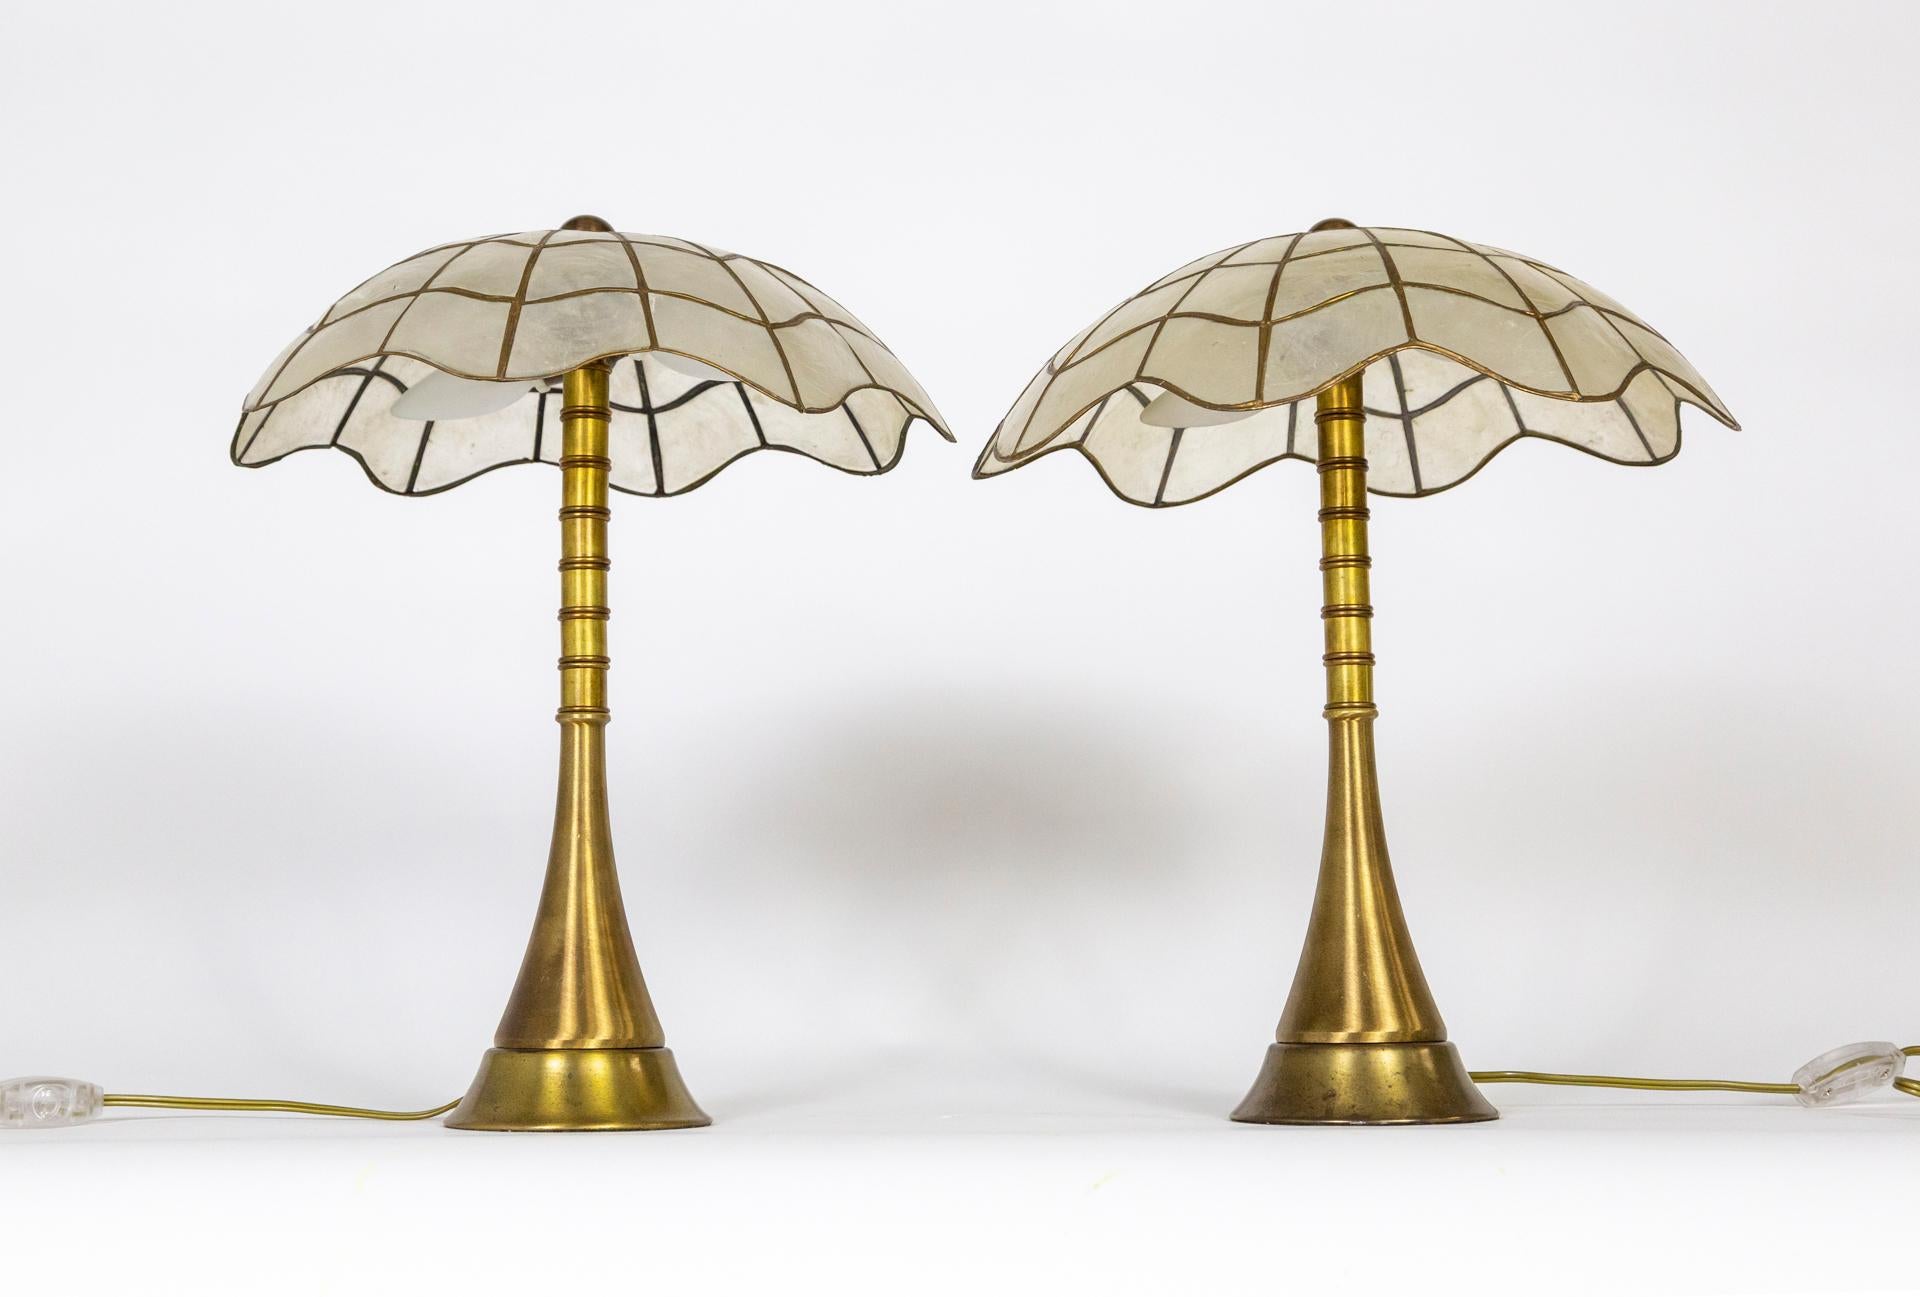 A splendid pair of newly made table lamps with Hollywood Regency vibes.  They have sleek, trumpeted stems with banded details and mosaic capiz shell shades in a scalloped, umbrella shape. The illumination through the shell is lovely. They each have